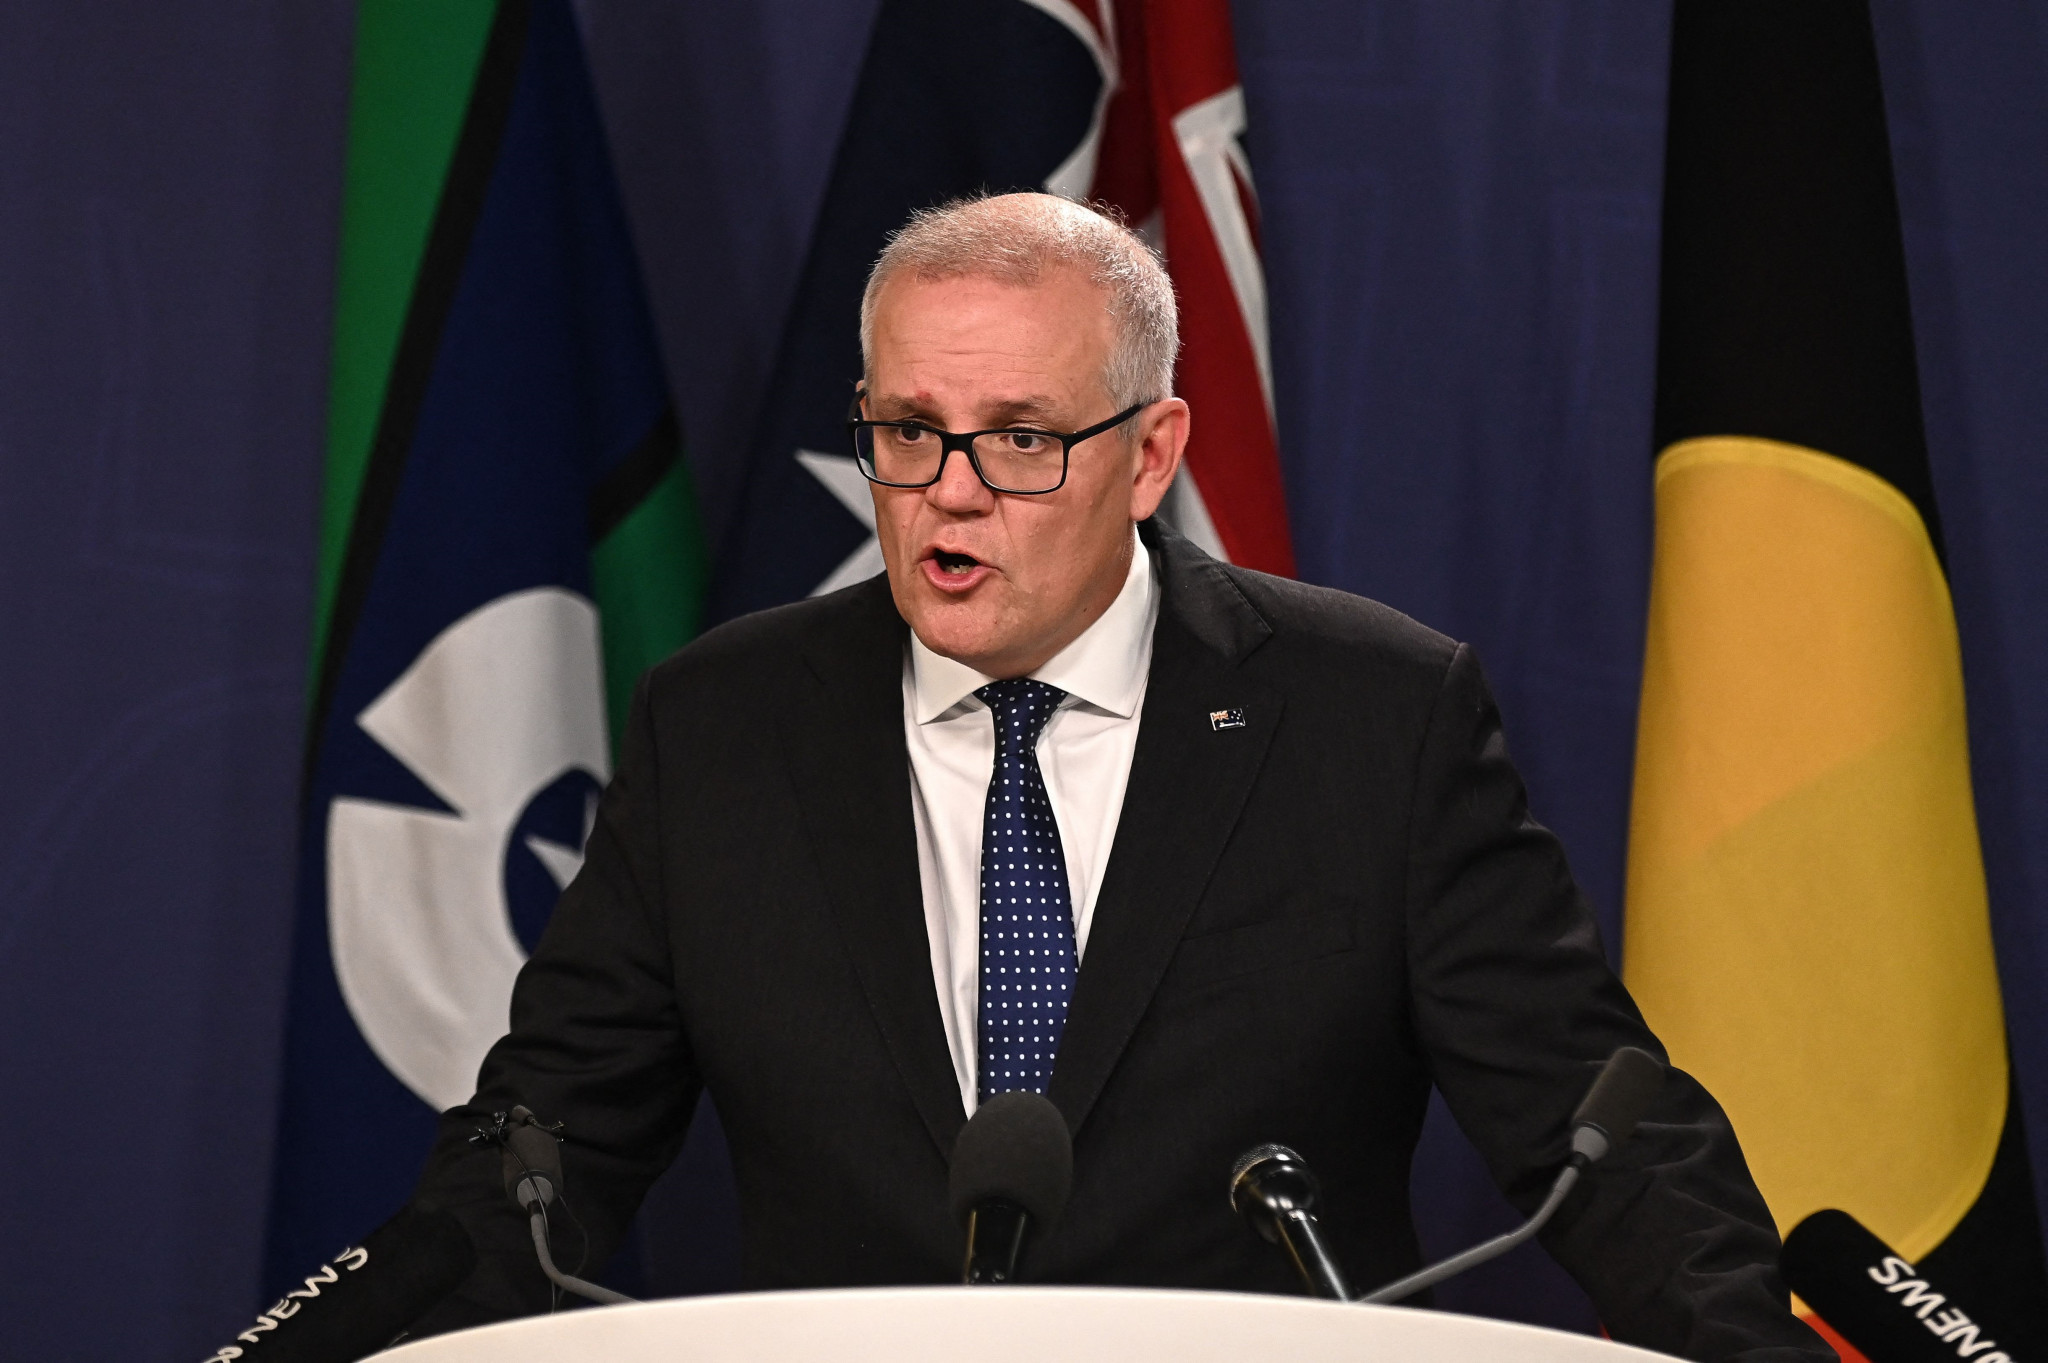 Former Australian Prime Minister Scott Morrison has called for an end to a political "argy-bargy" over funding for the 2032 Olympics and Paralympics in Brisbane ©Getty Images